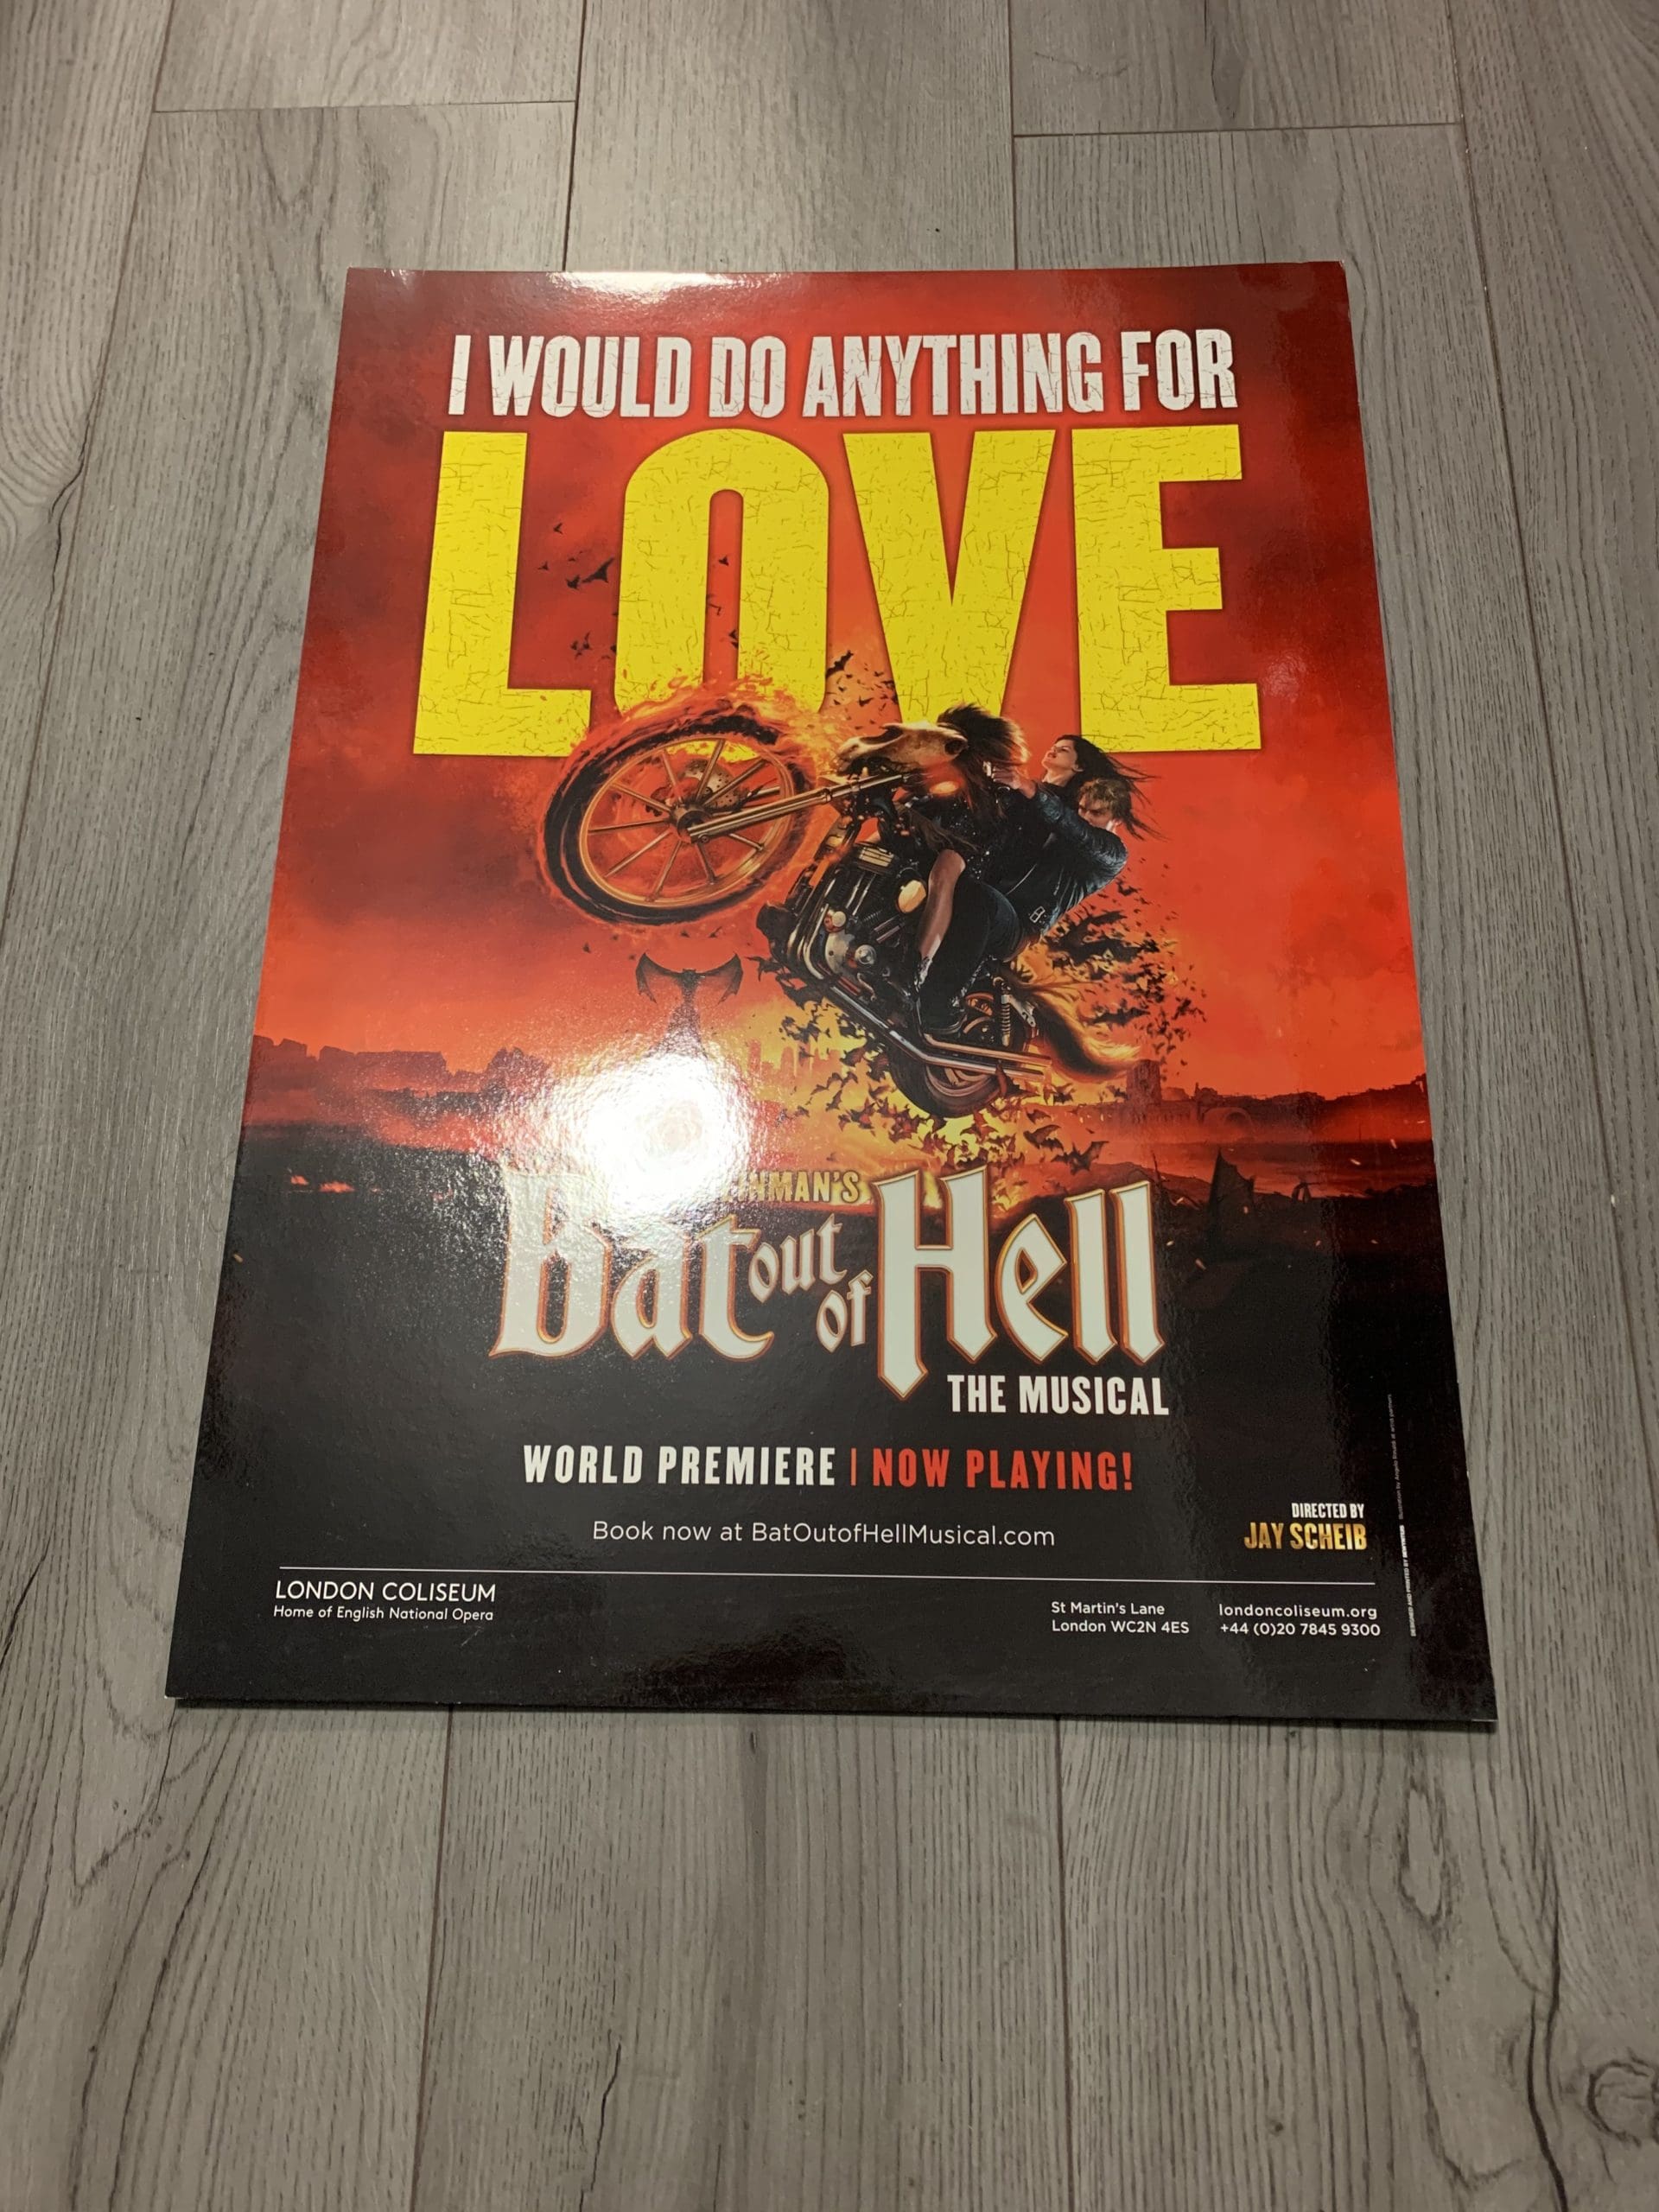 Enter our competition for a chance to win a Bat Out Of Hell poster